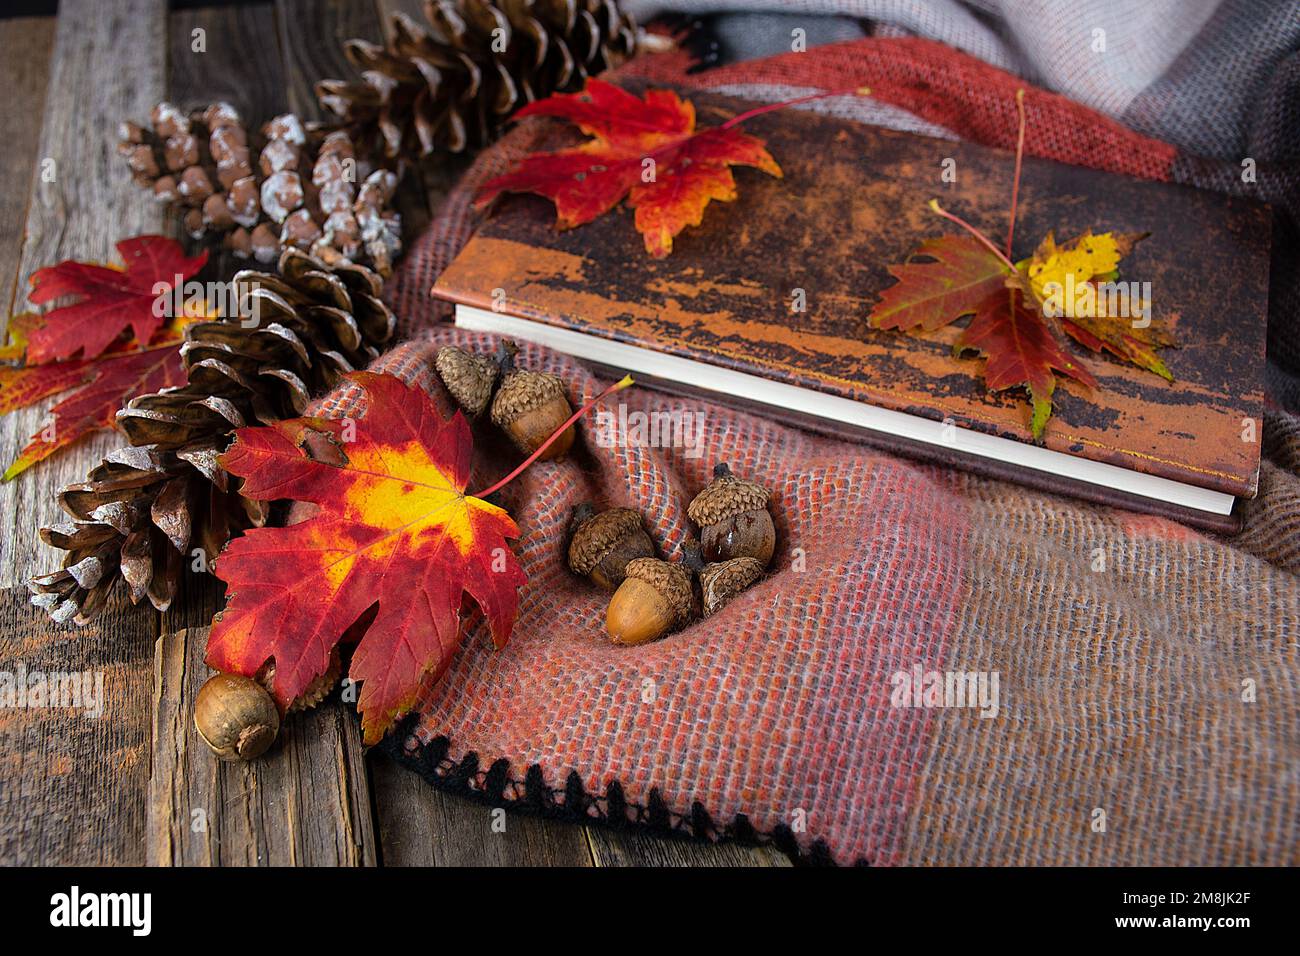 Book, acorns, pine cones, and autumn maple leaves on a soft blanket Stock Photo